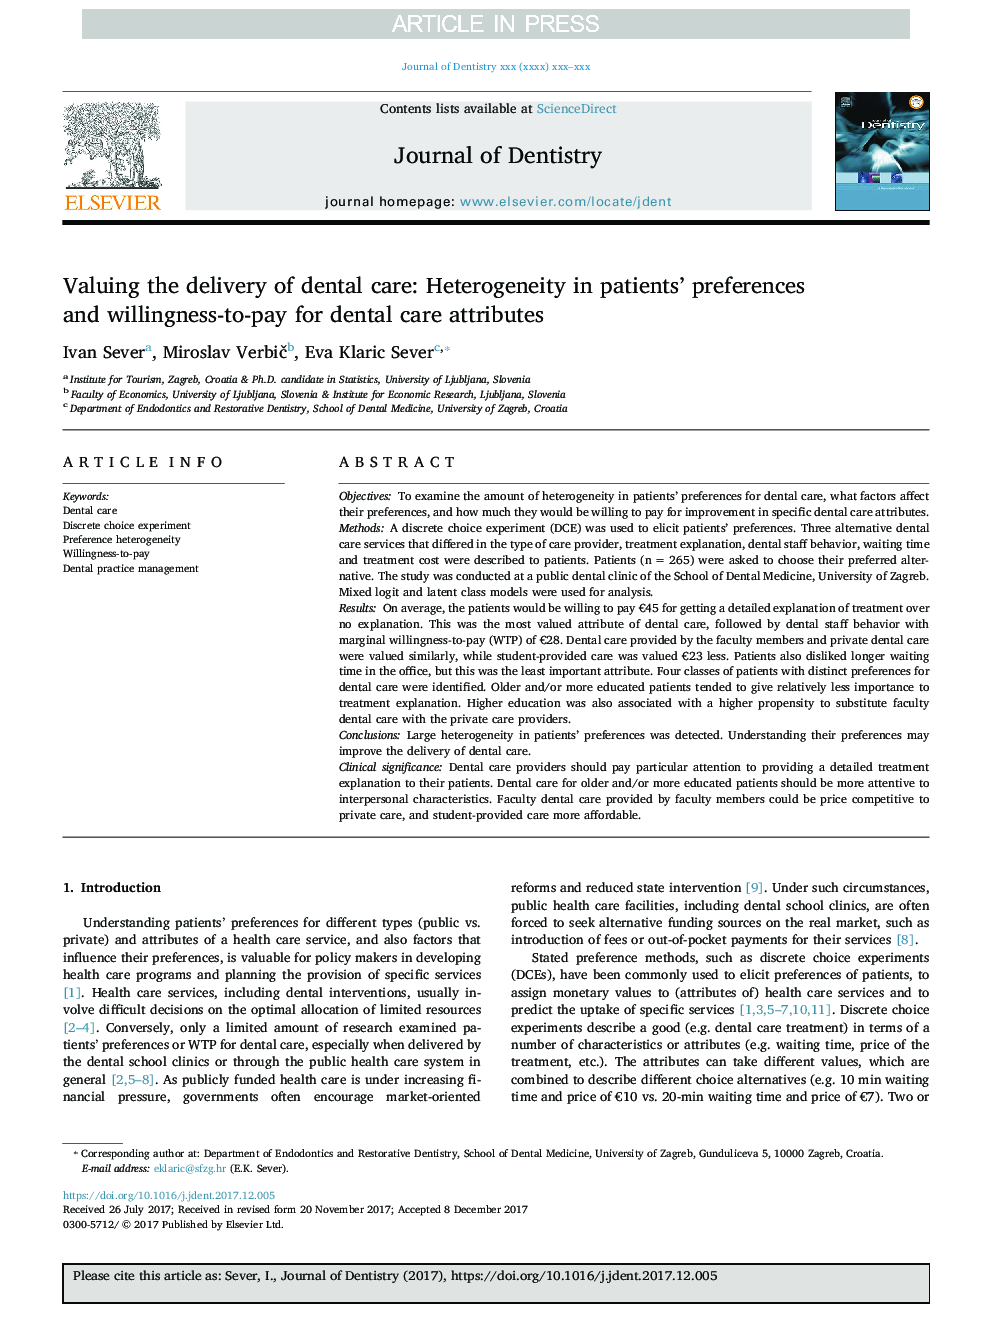 Valuing the delivery of dental care: Heterogeneity in patients' preferences and willingness-to-pay for dental care attributes